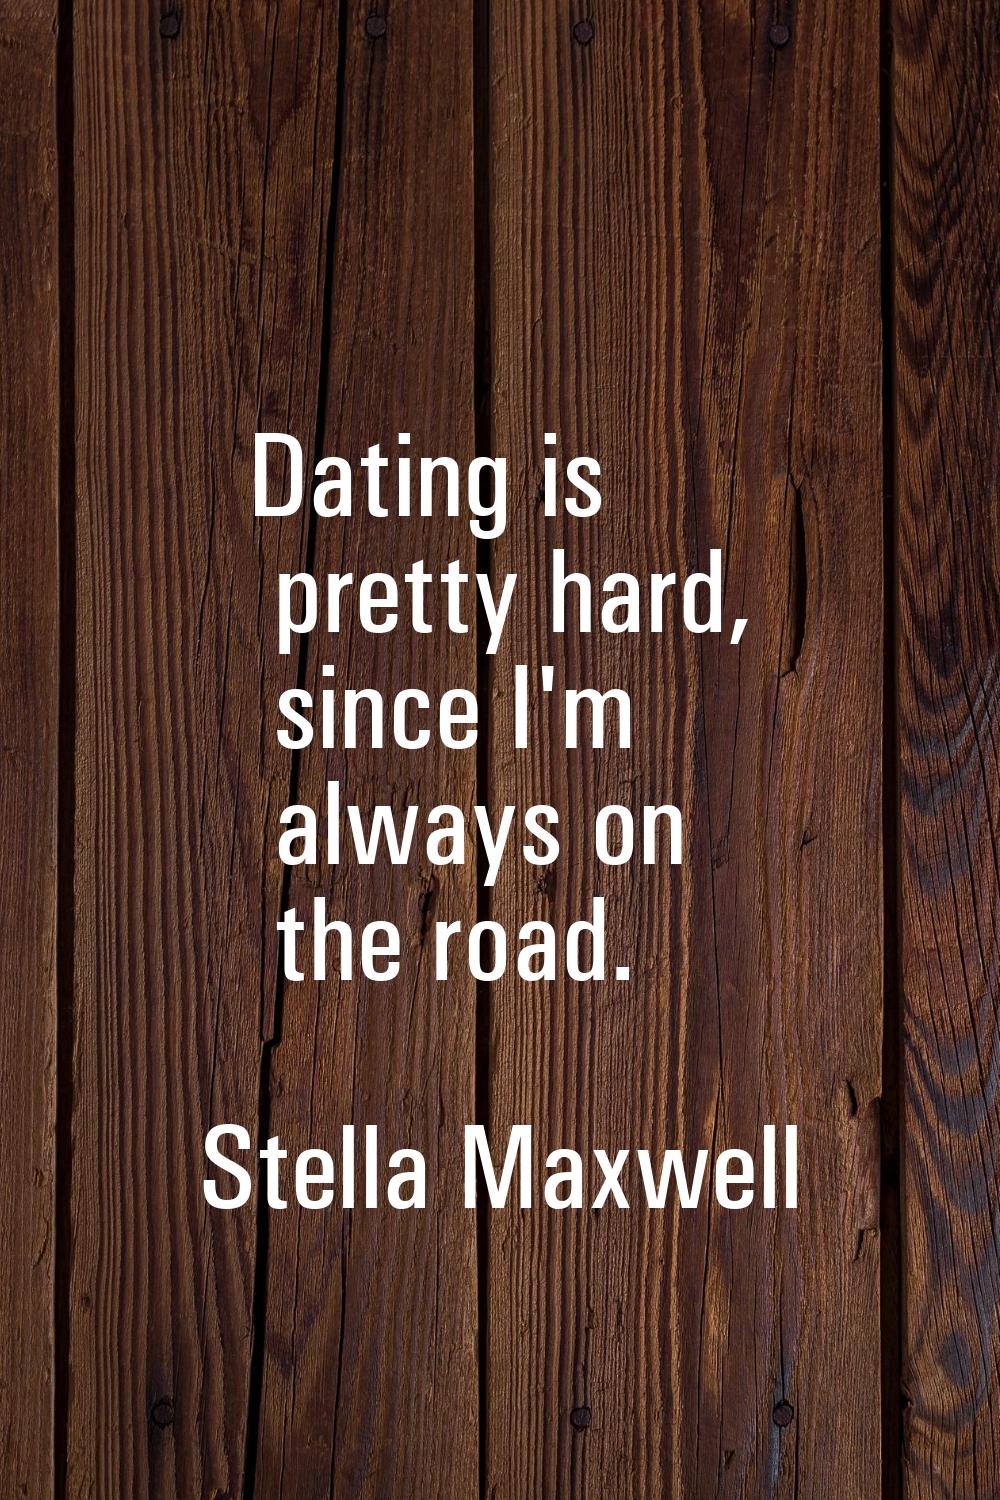 Dating is pretty hard, since I'm always on the road.